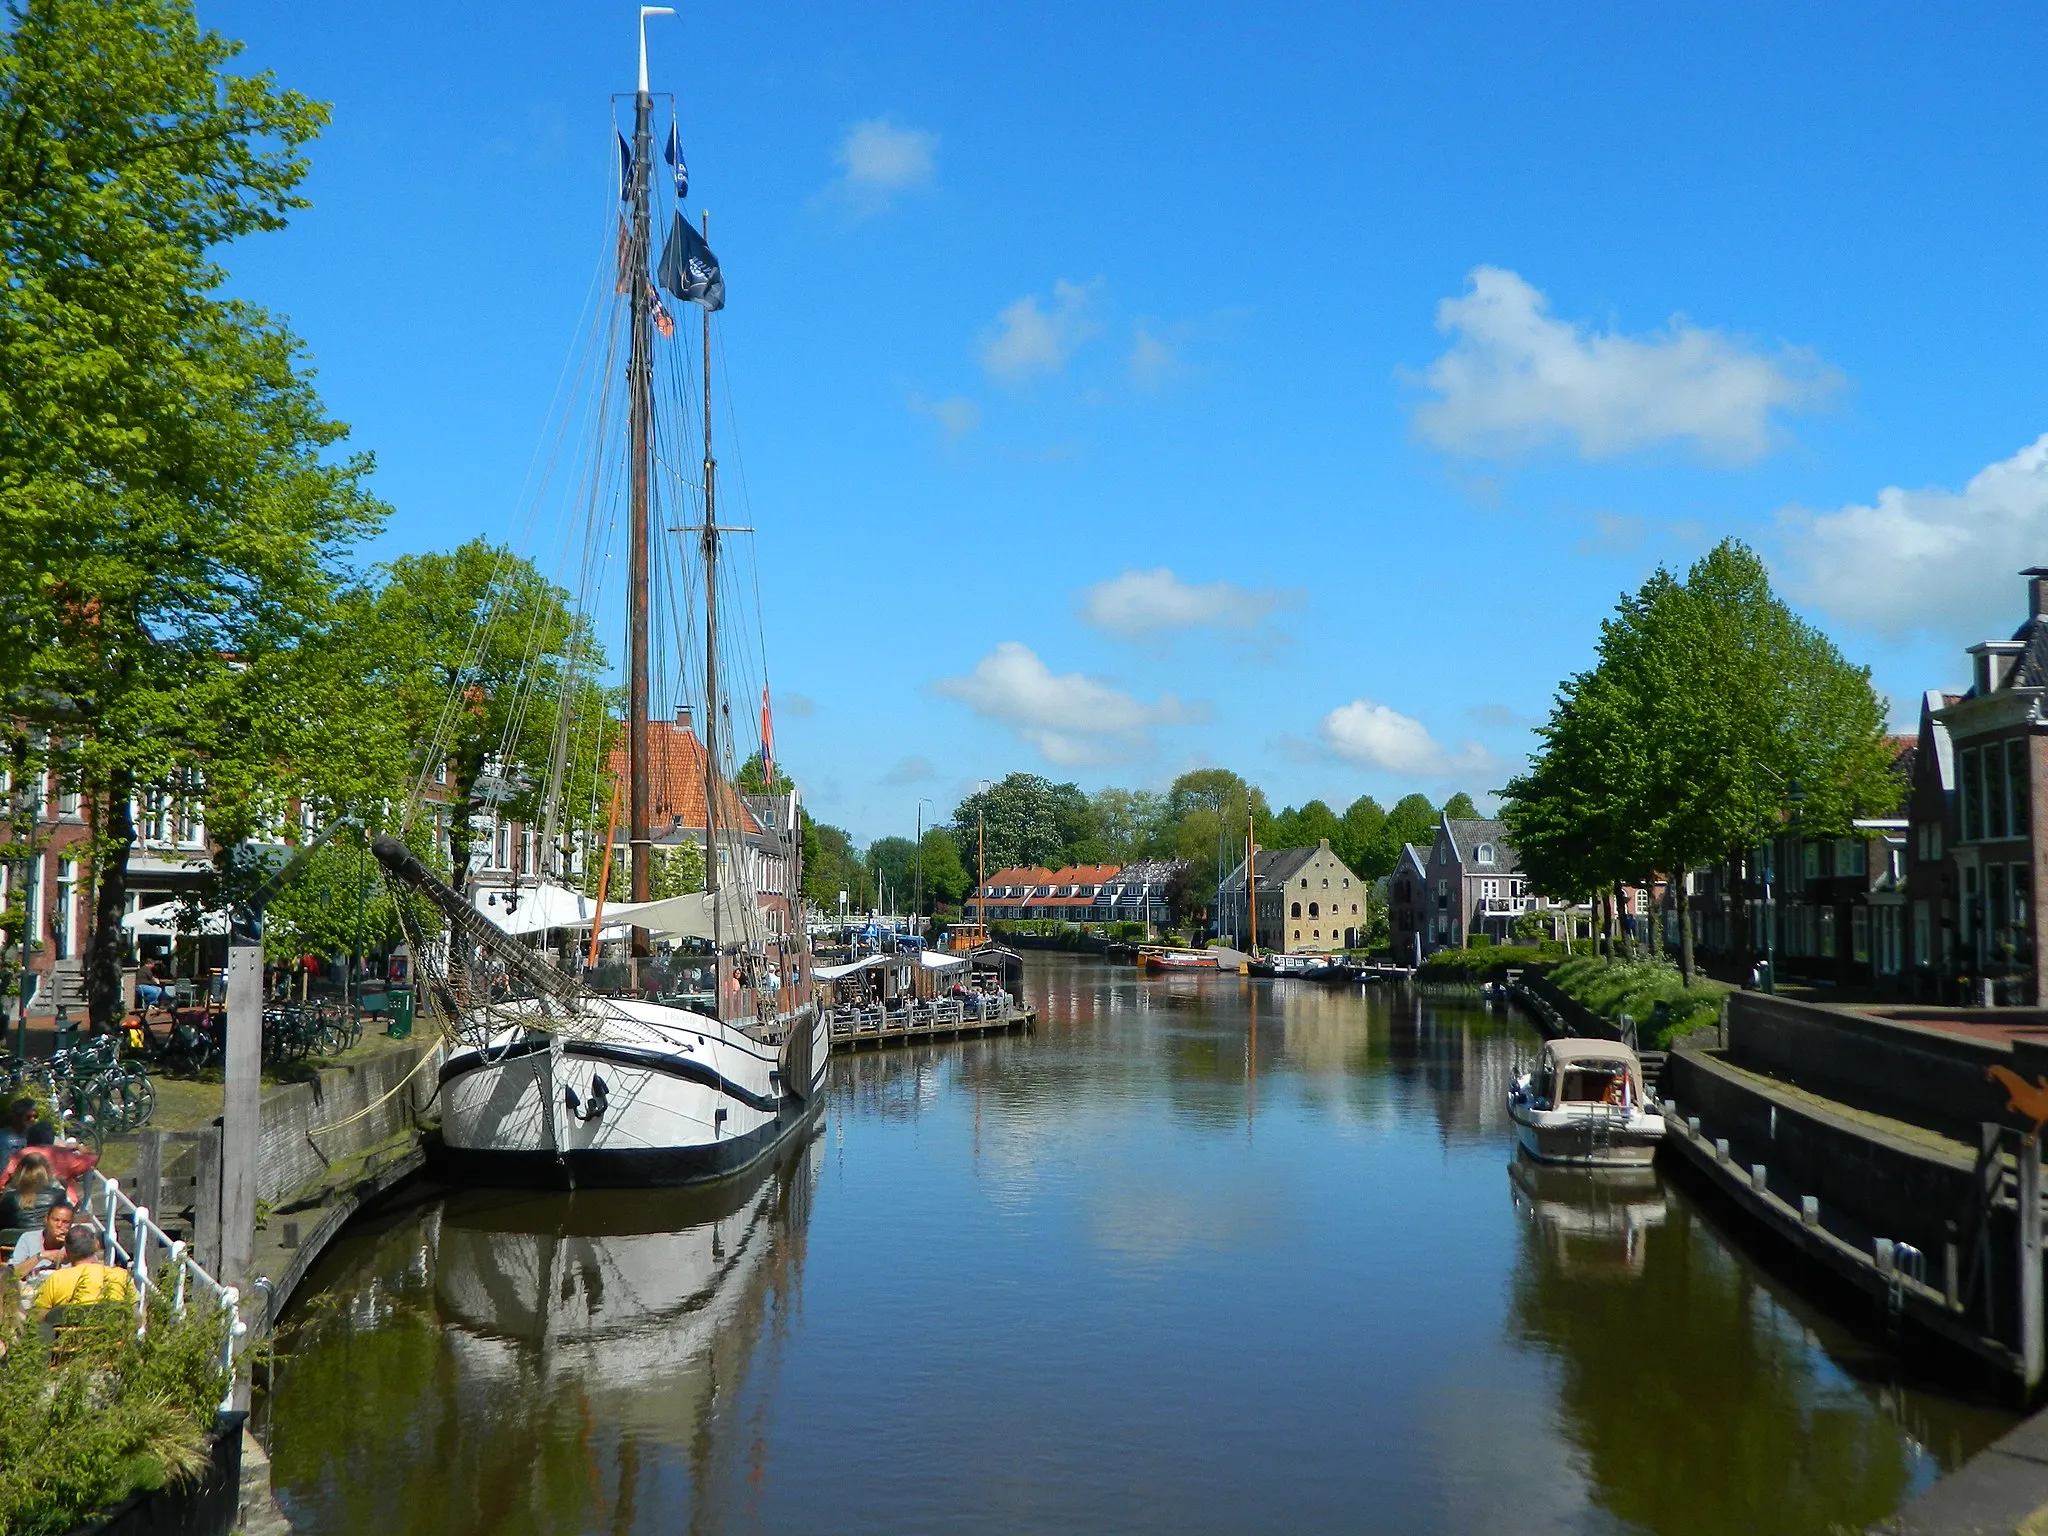 Photo showing: The 'Grootdiep' canal in Dokkum, Netherlands.